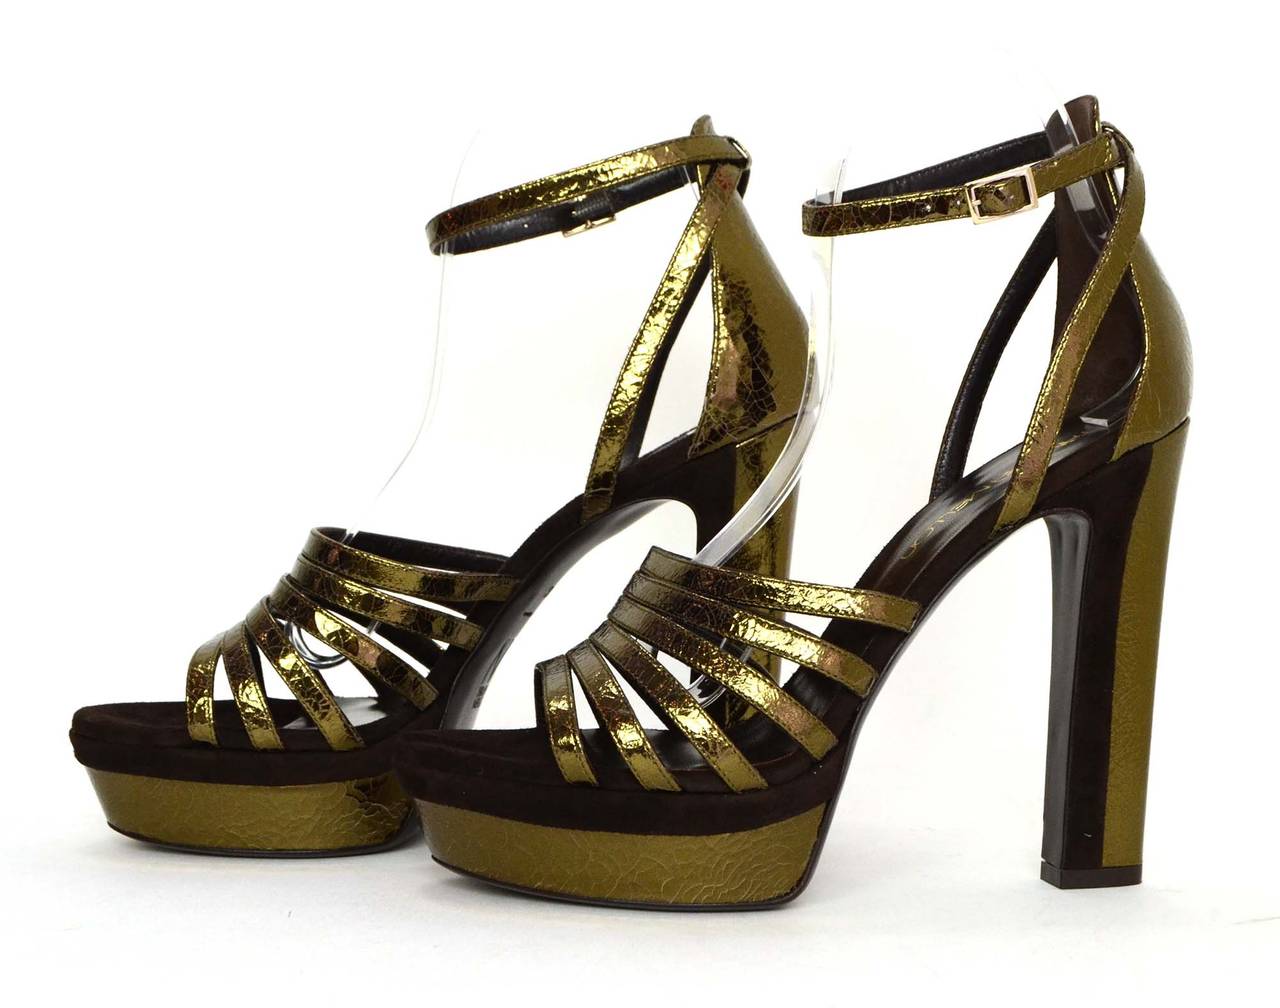 Tamara Mellon Bronze "Supreme 105" Metallic Strappy Platform Sandals
Bronze leather features a distressed crackle effect throughout
Made in: Italy
Color: Metallic bronze and brown
Composition: Leather and suede
Sole Stamp: Made in